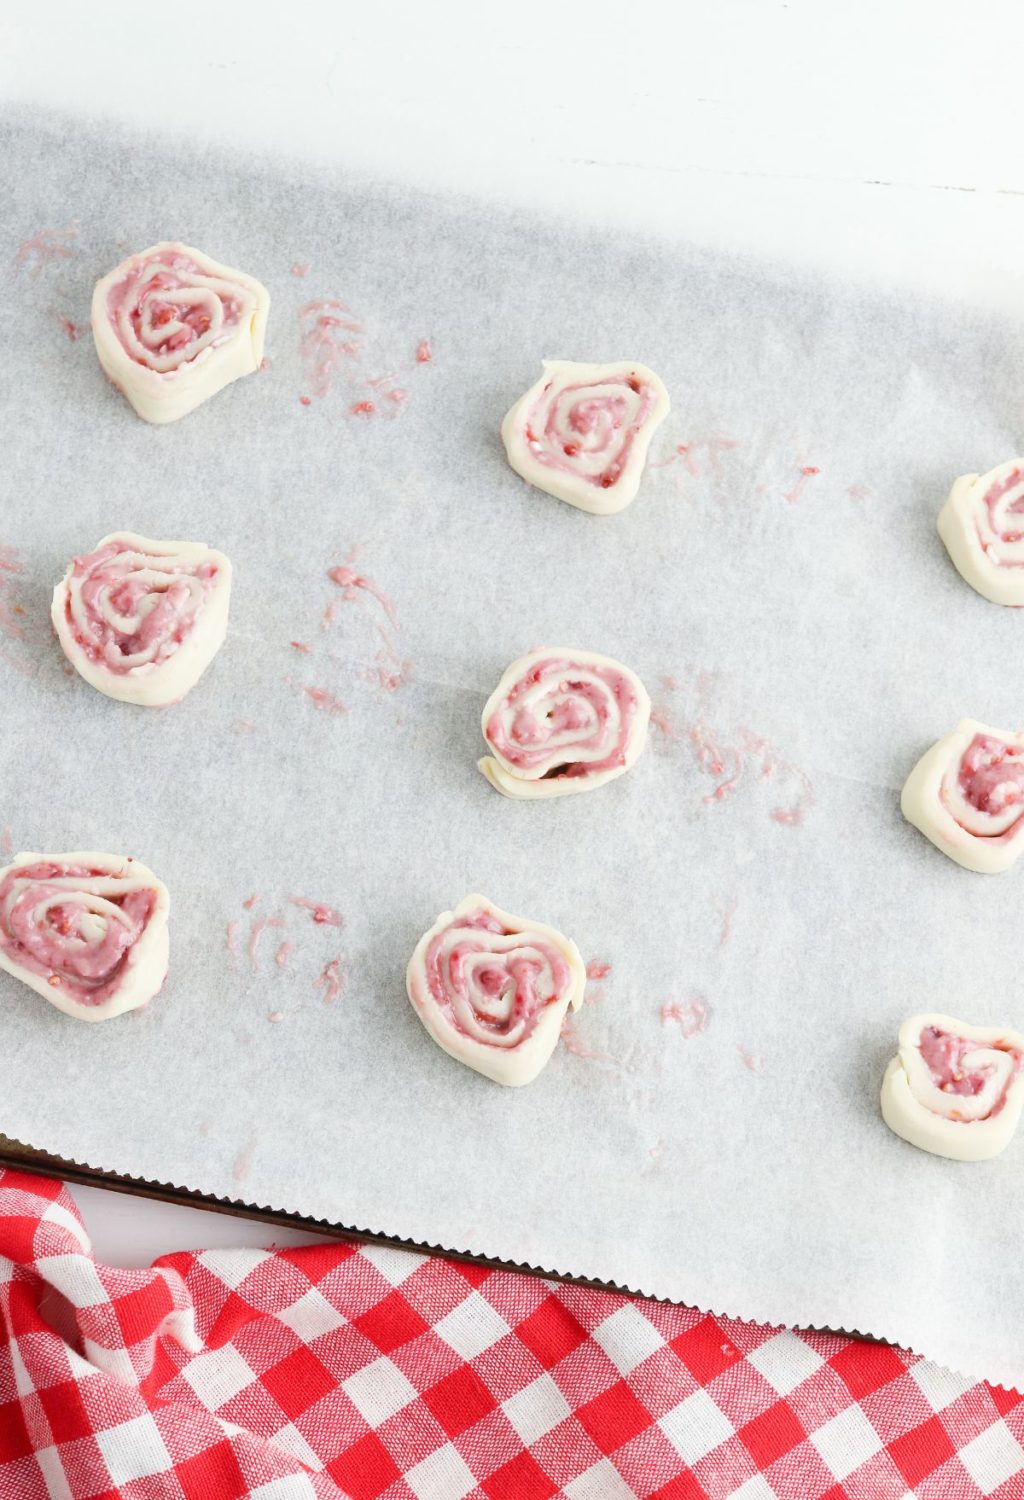 A baking sheet with red and white roses on it.